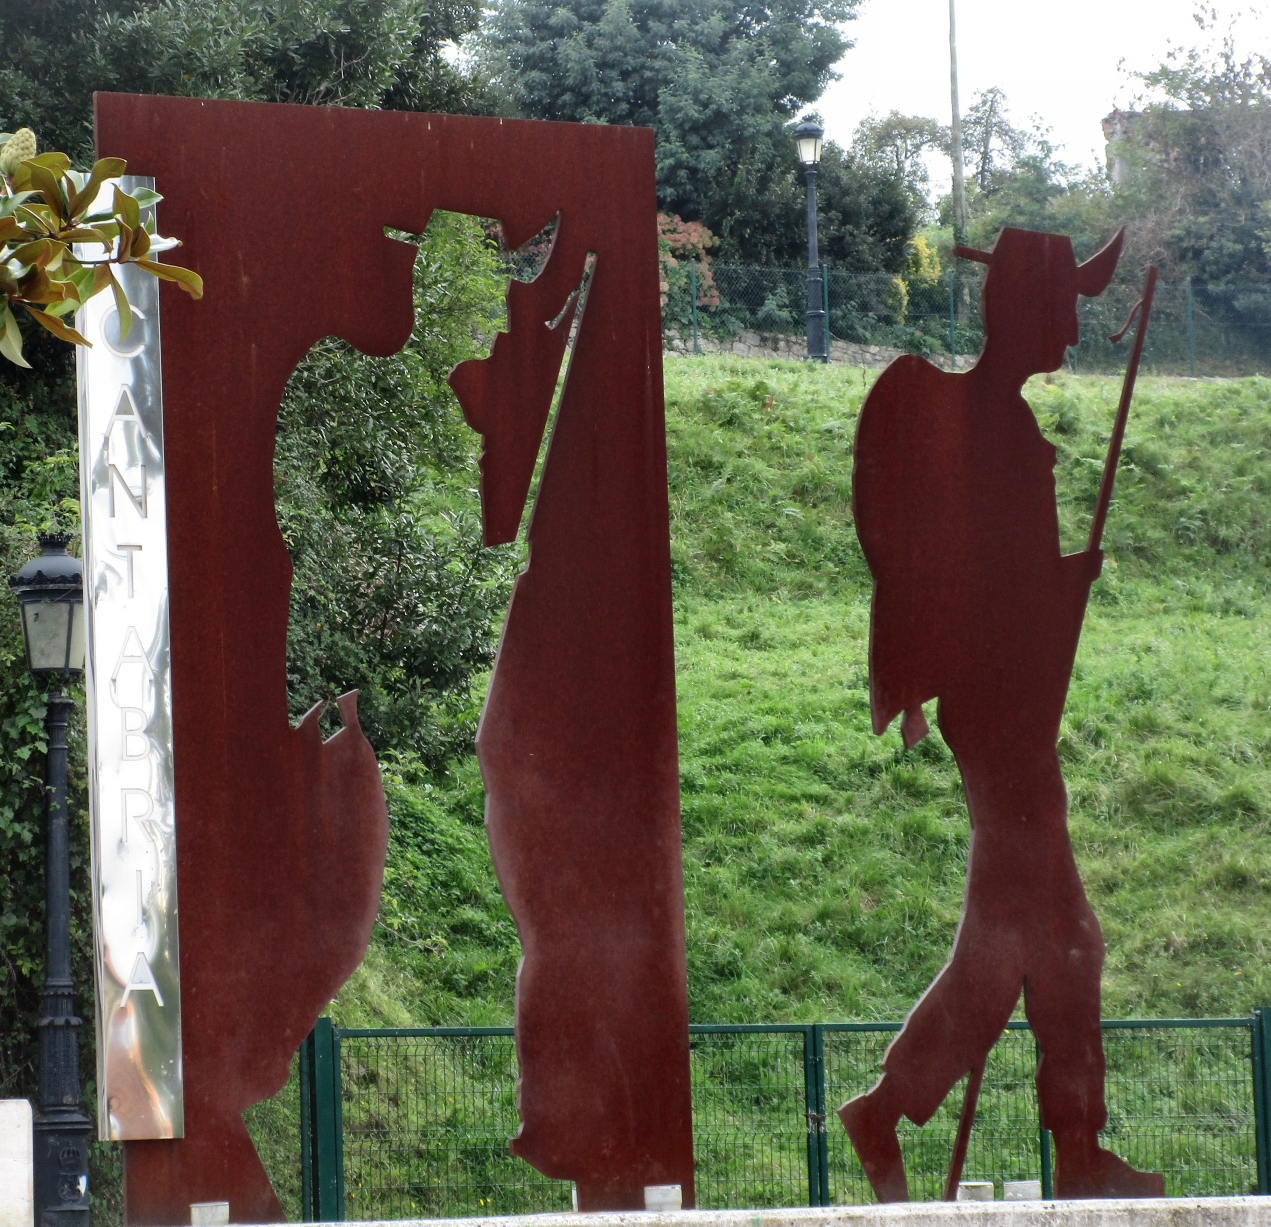 Iron sculpture of a pilgrim in the town of Cobreses, Spain